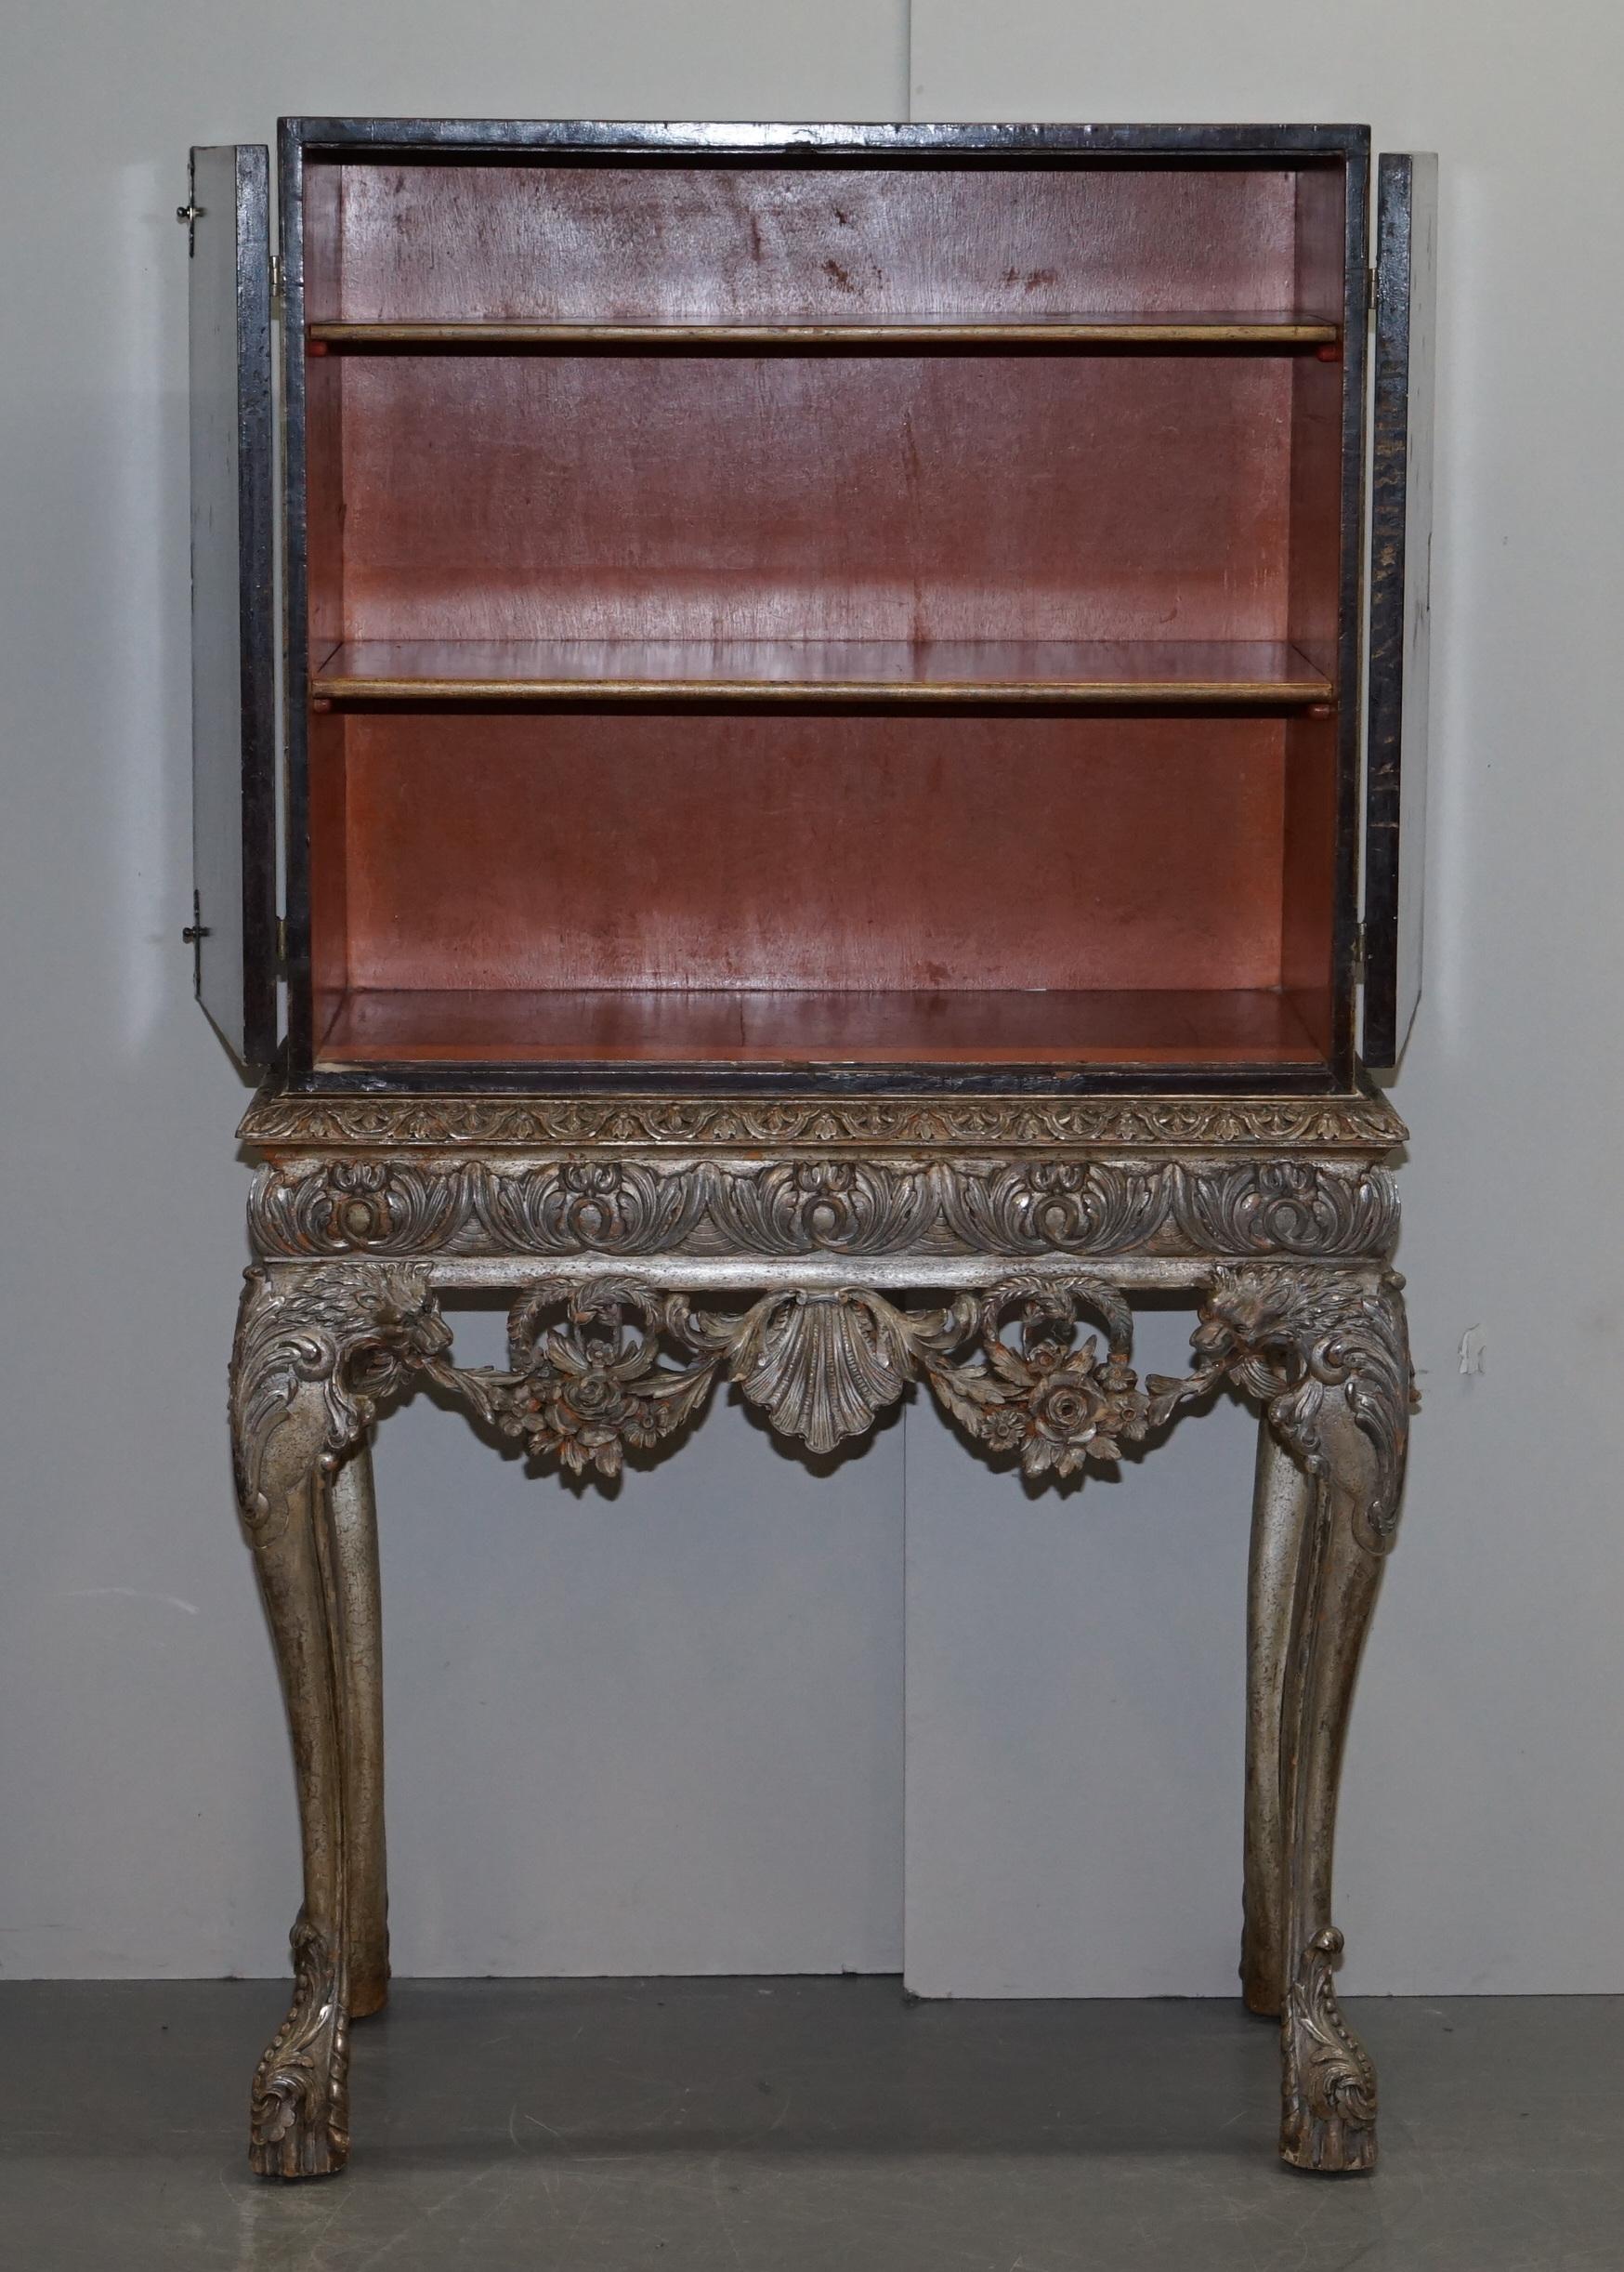 1840 Italain Venetian Cabinet on Stand Polychrome Painted & Lion Heads Carvings For Sale 12